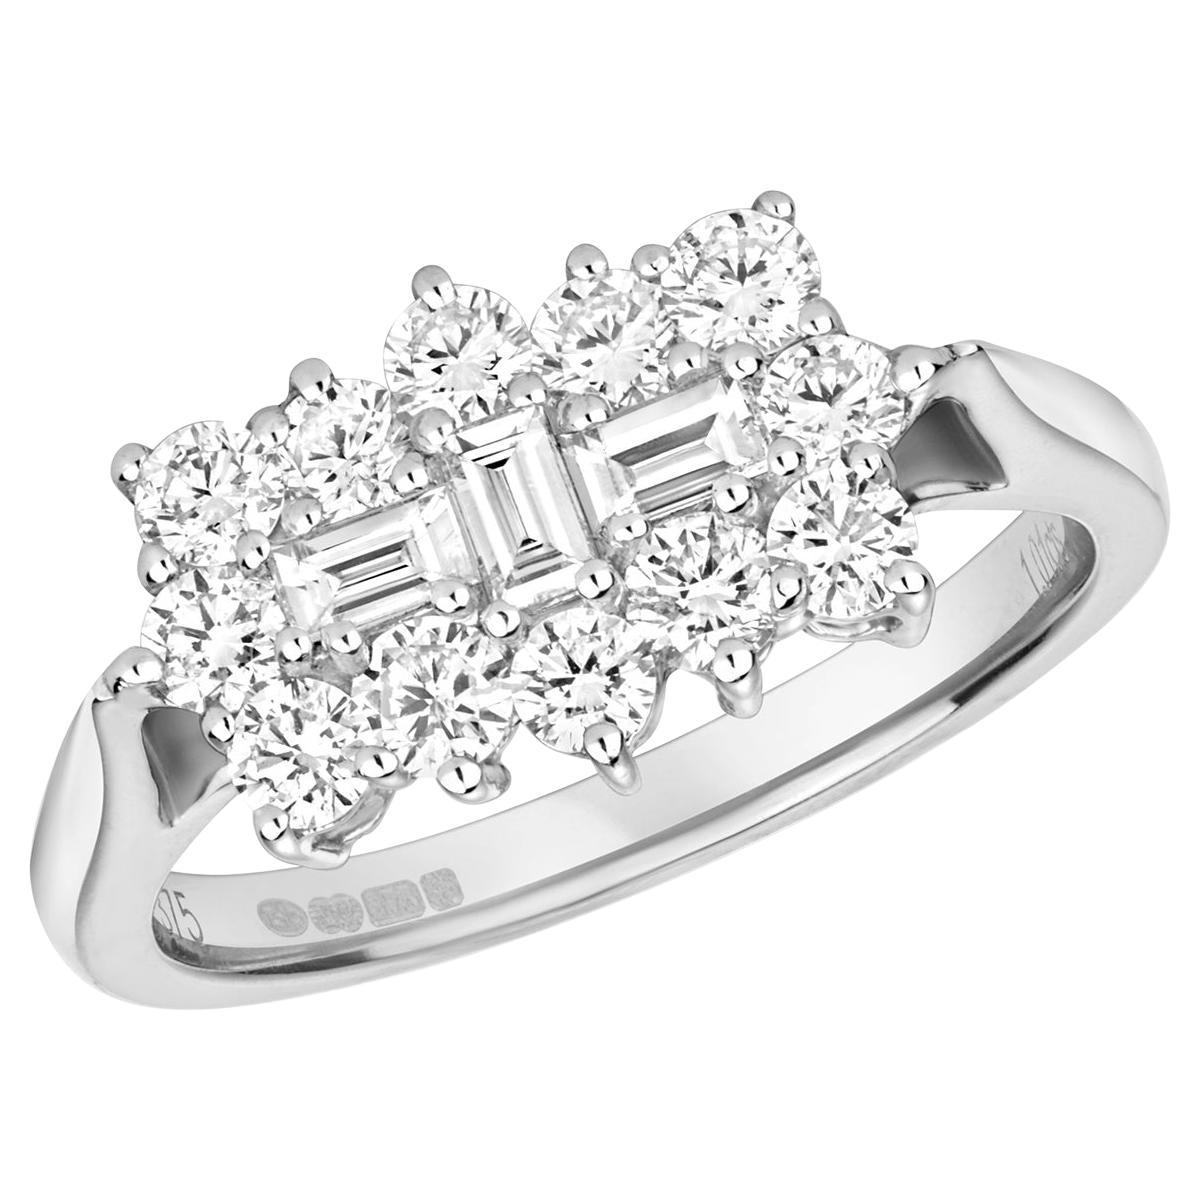 1ct DIAMOND ROUND AND BAGUETTE CLUSTER BOAT RING IN 9CT WHITE GOLD